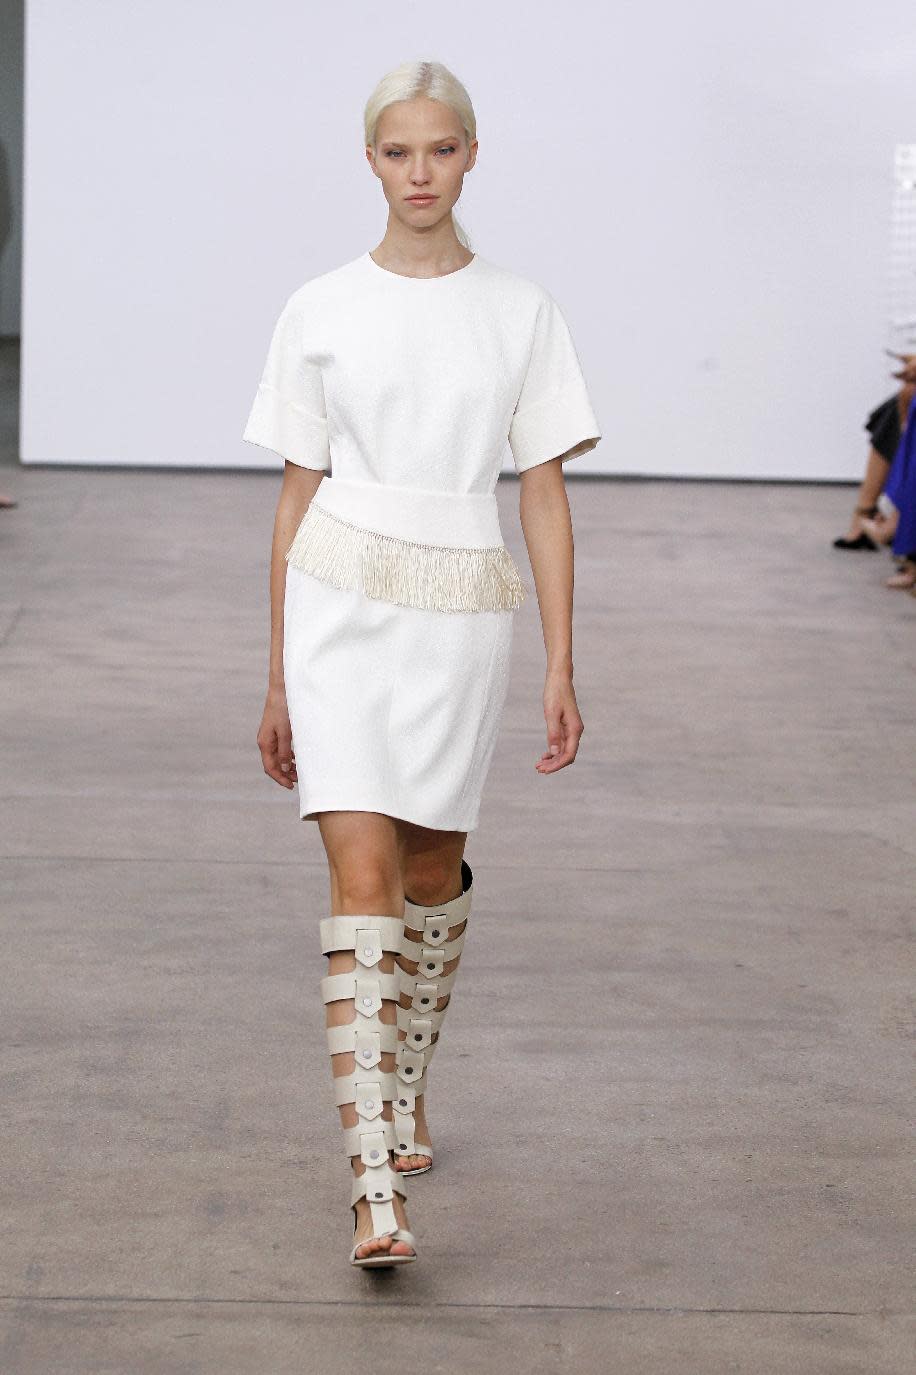 In this photo provided by Derek Lam, the Derek Lam Spring 2014 collection is modeled during Fashion Week, Sunday, Sept. 8, 2013, in New York. (AP Photo/Derek Lam, Dan & Corina Lecca)